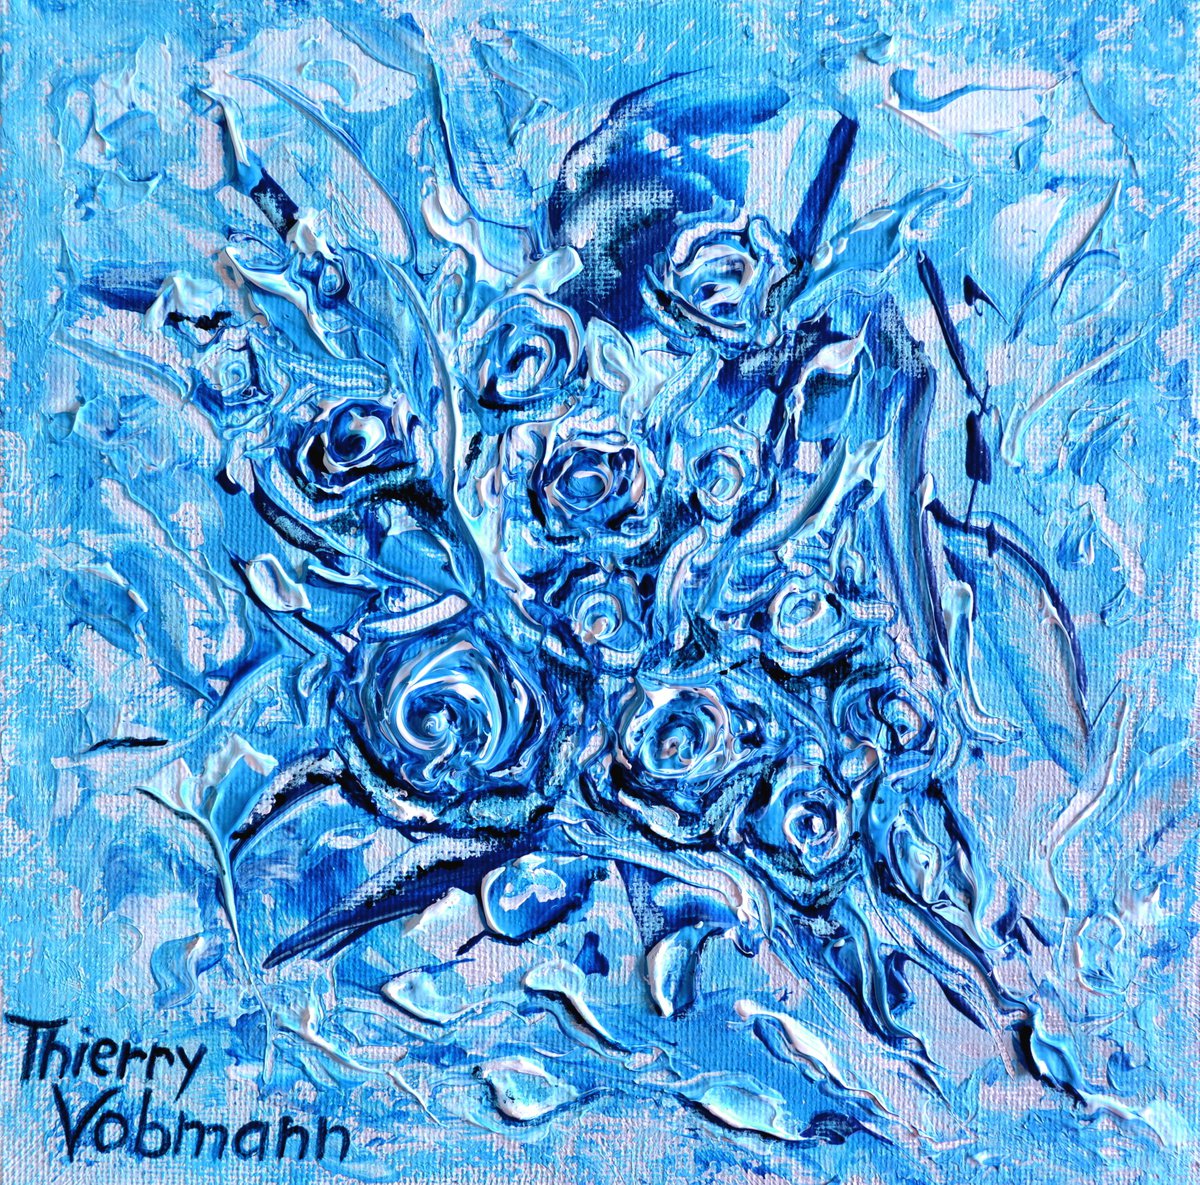 MINIATURE YET GREAT GIFT 2. Gift idea, ideal present,affordable painting,original artwork by Thierry Vobmann. Abstract .